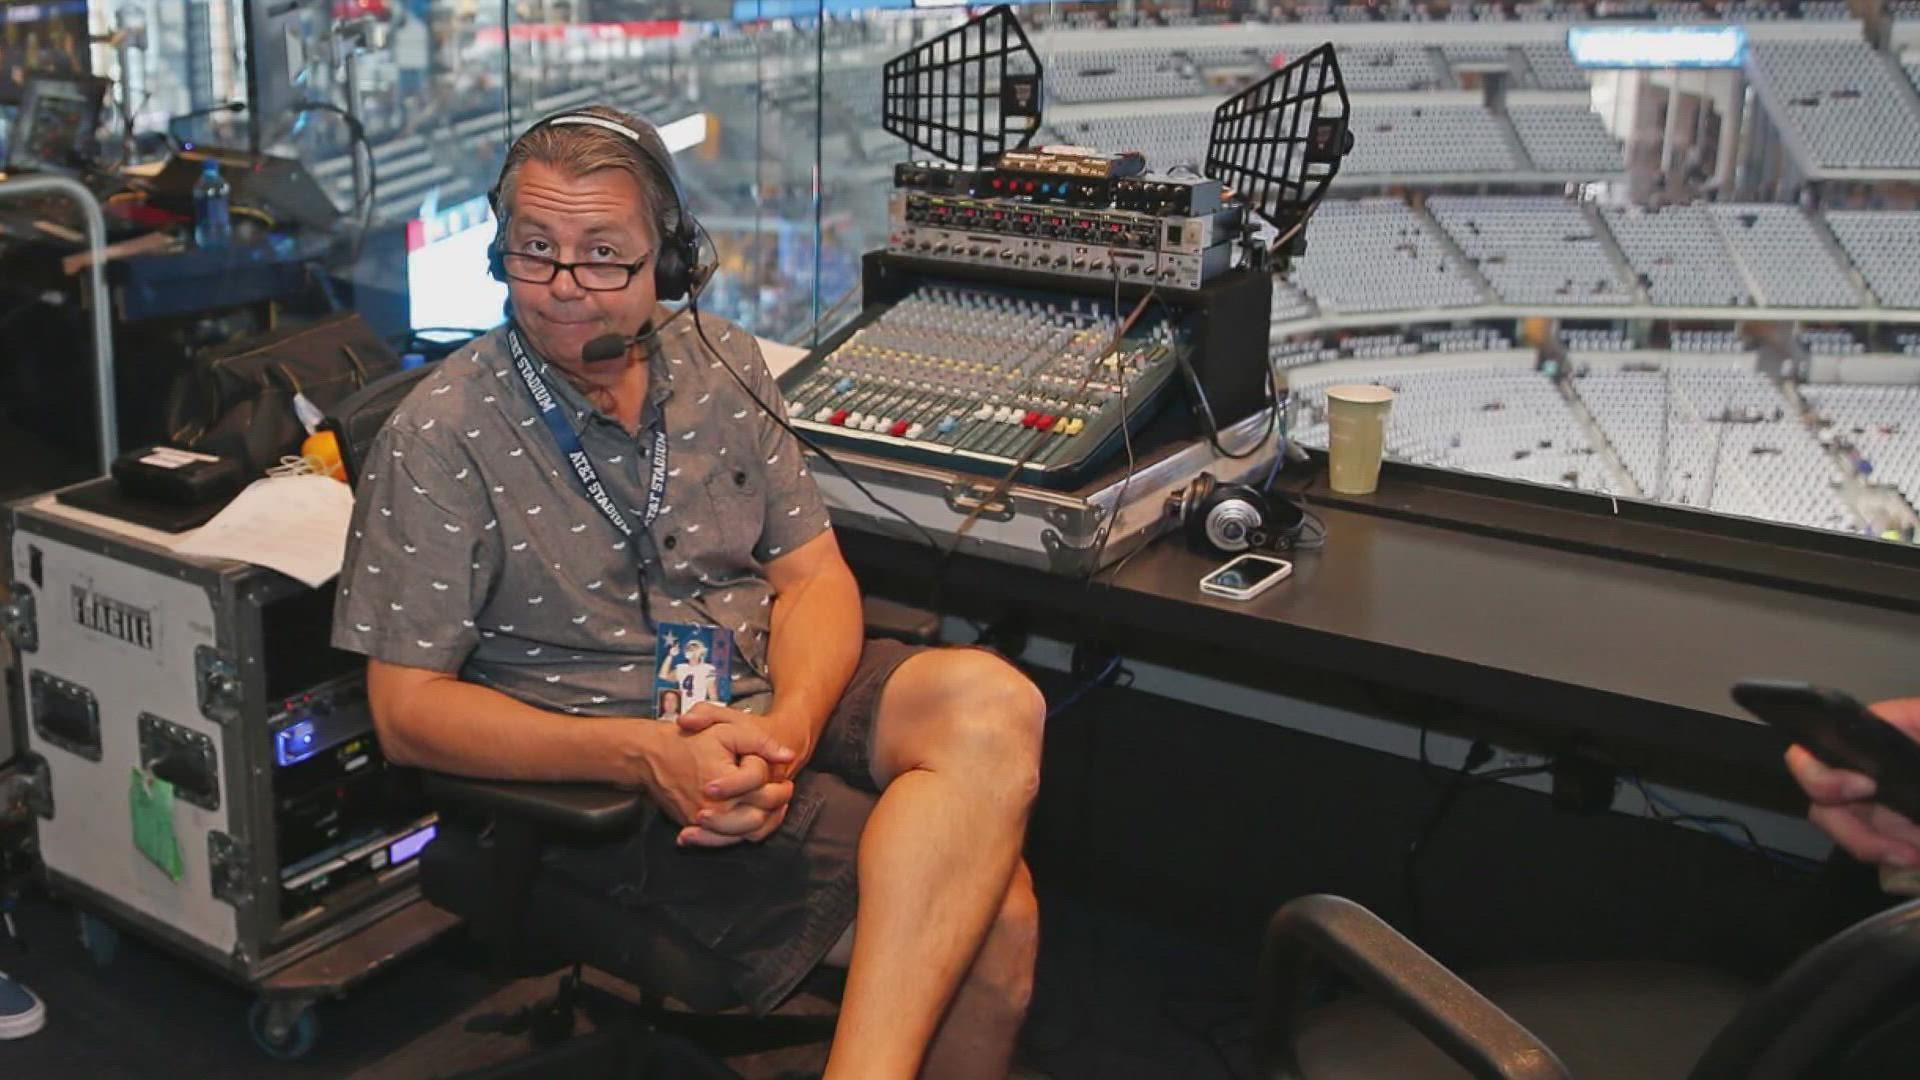 Ted Nichols-Payne worked as the Texas Rangers' radio network engineer for nearly 30 years.